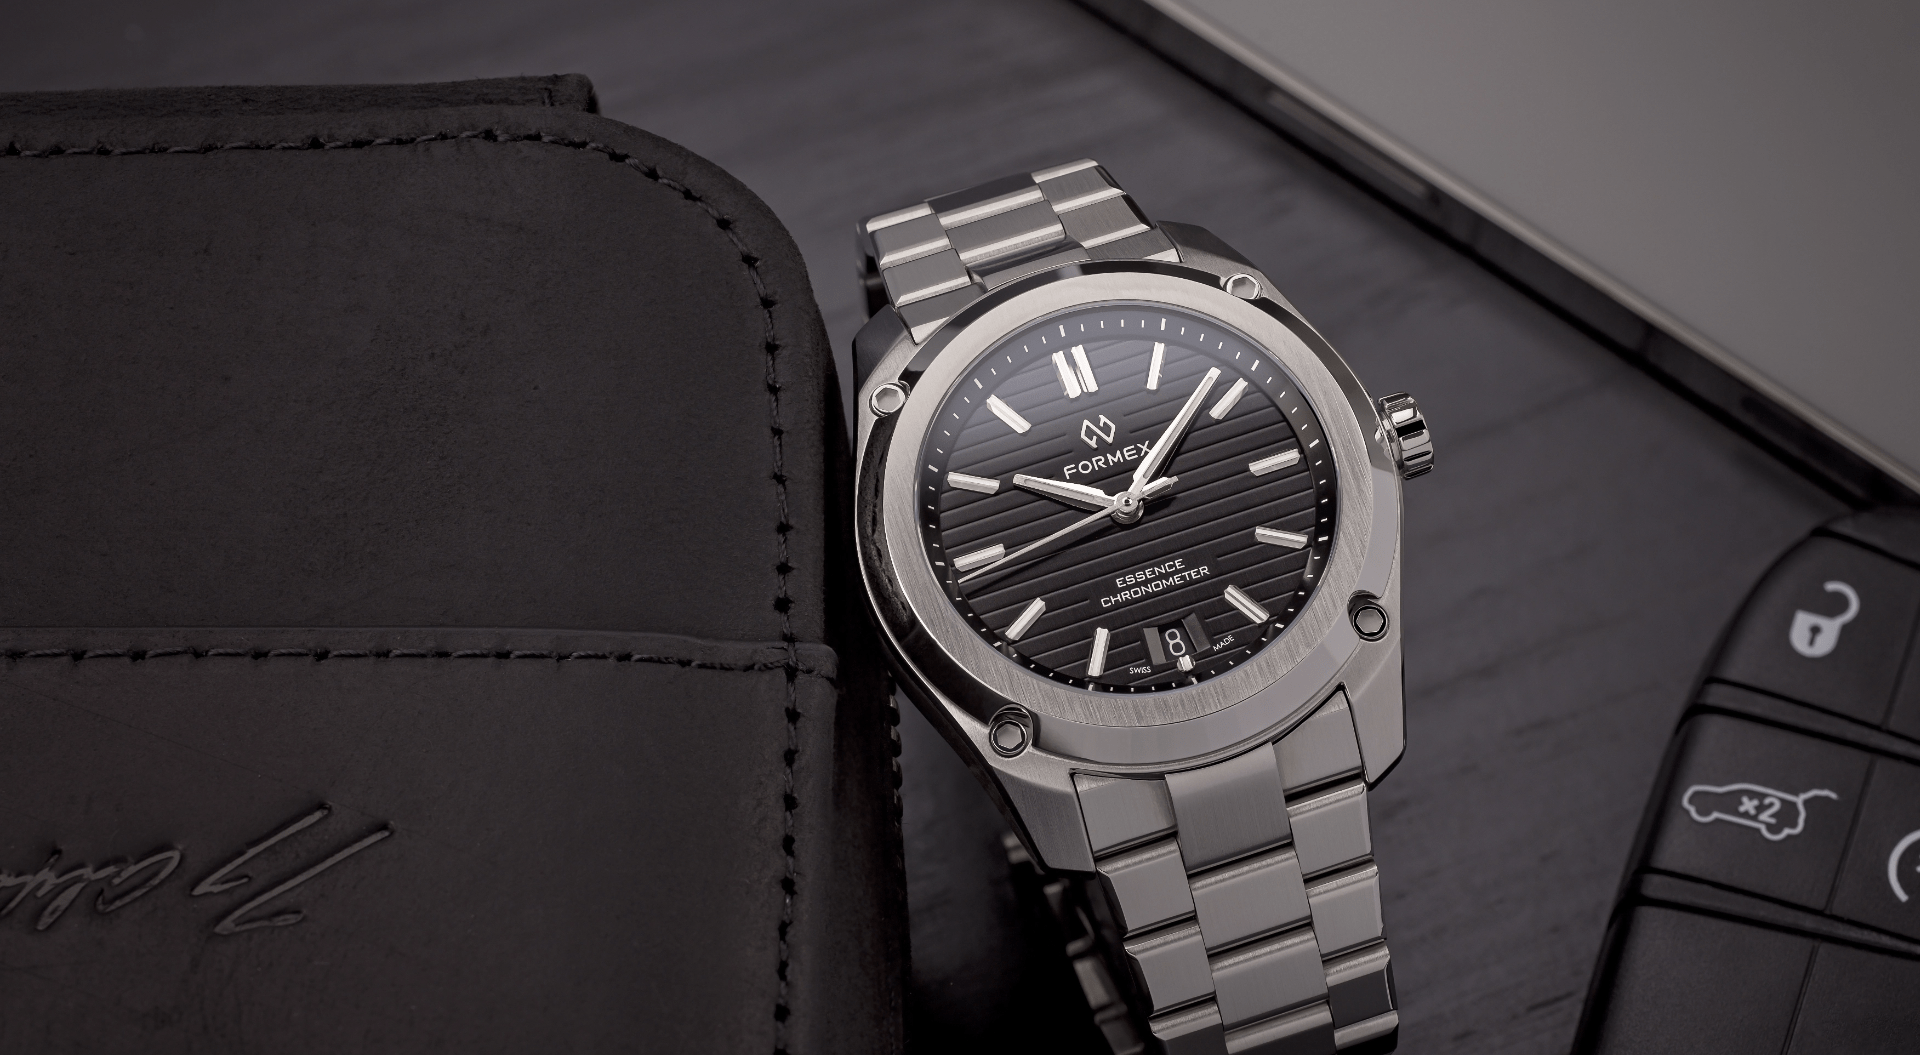 FORMEX | Innovating Swiss precision. Made for the enthusiast.